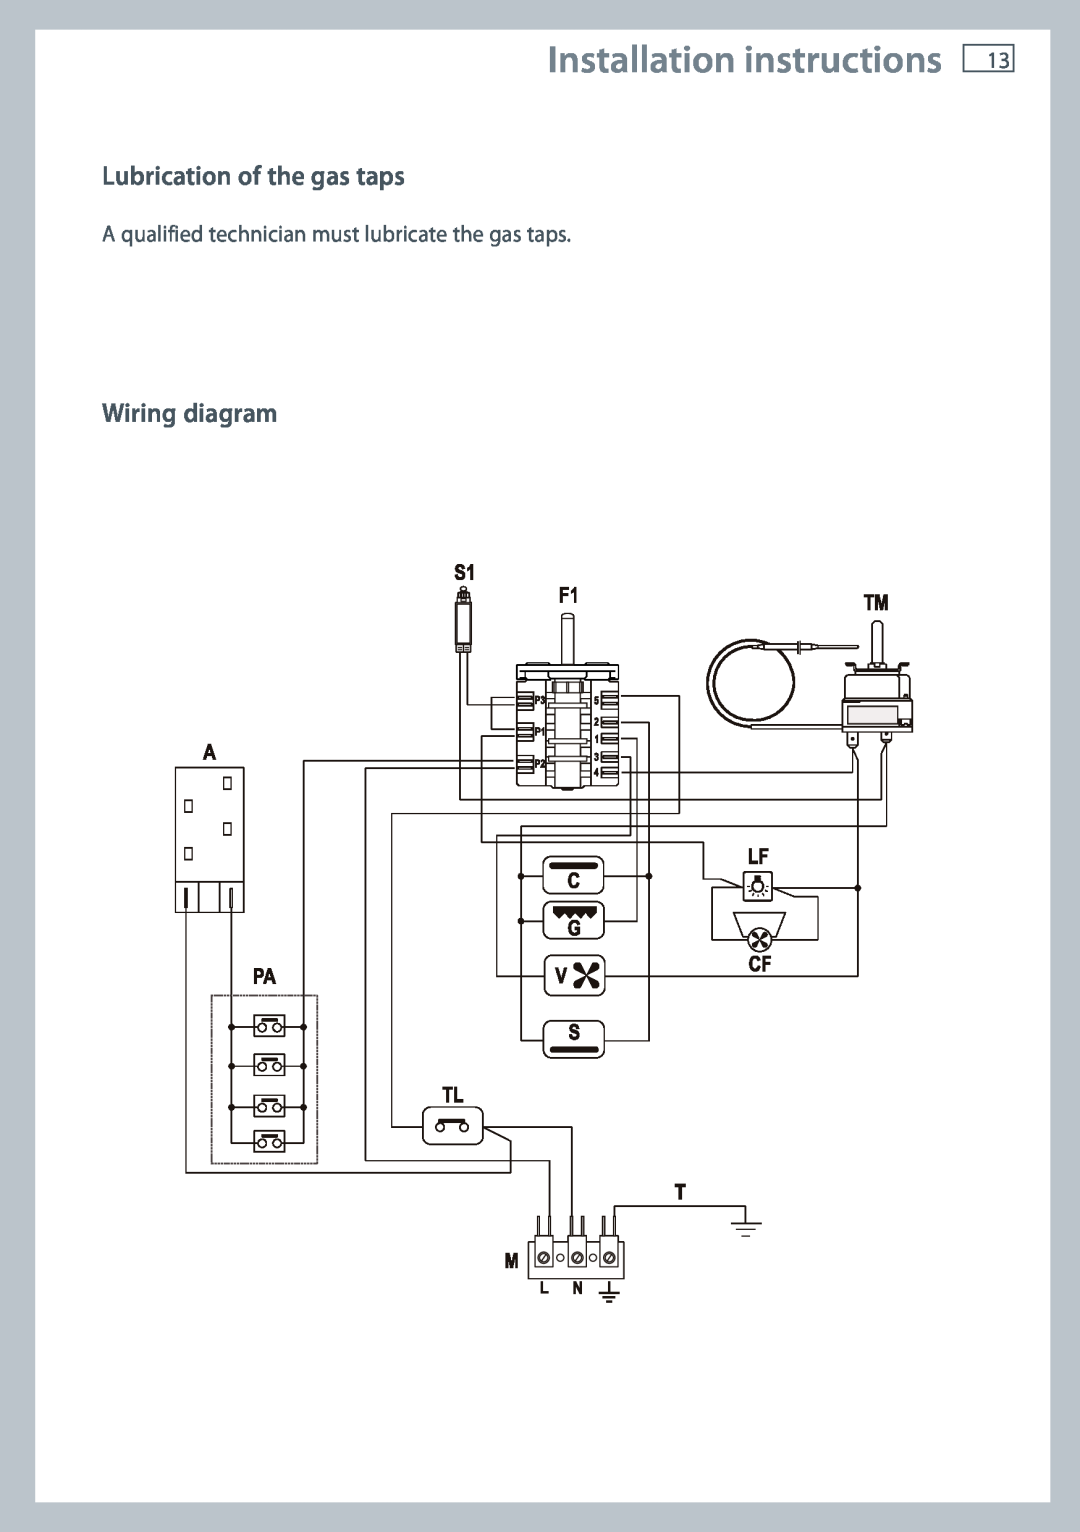 Fisher & Paykel 60 installation instructions Lubrication of the gas taps, Wiring diagram, Installation instructions 